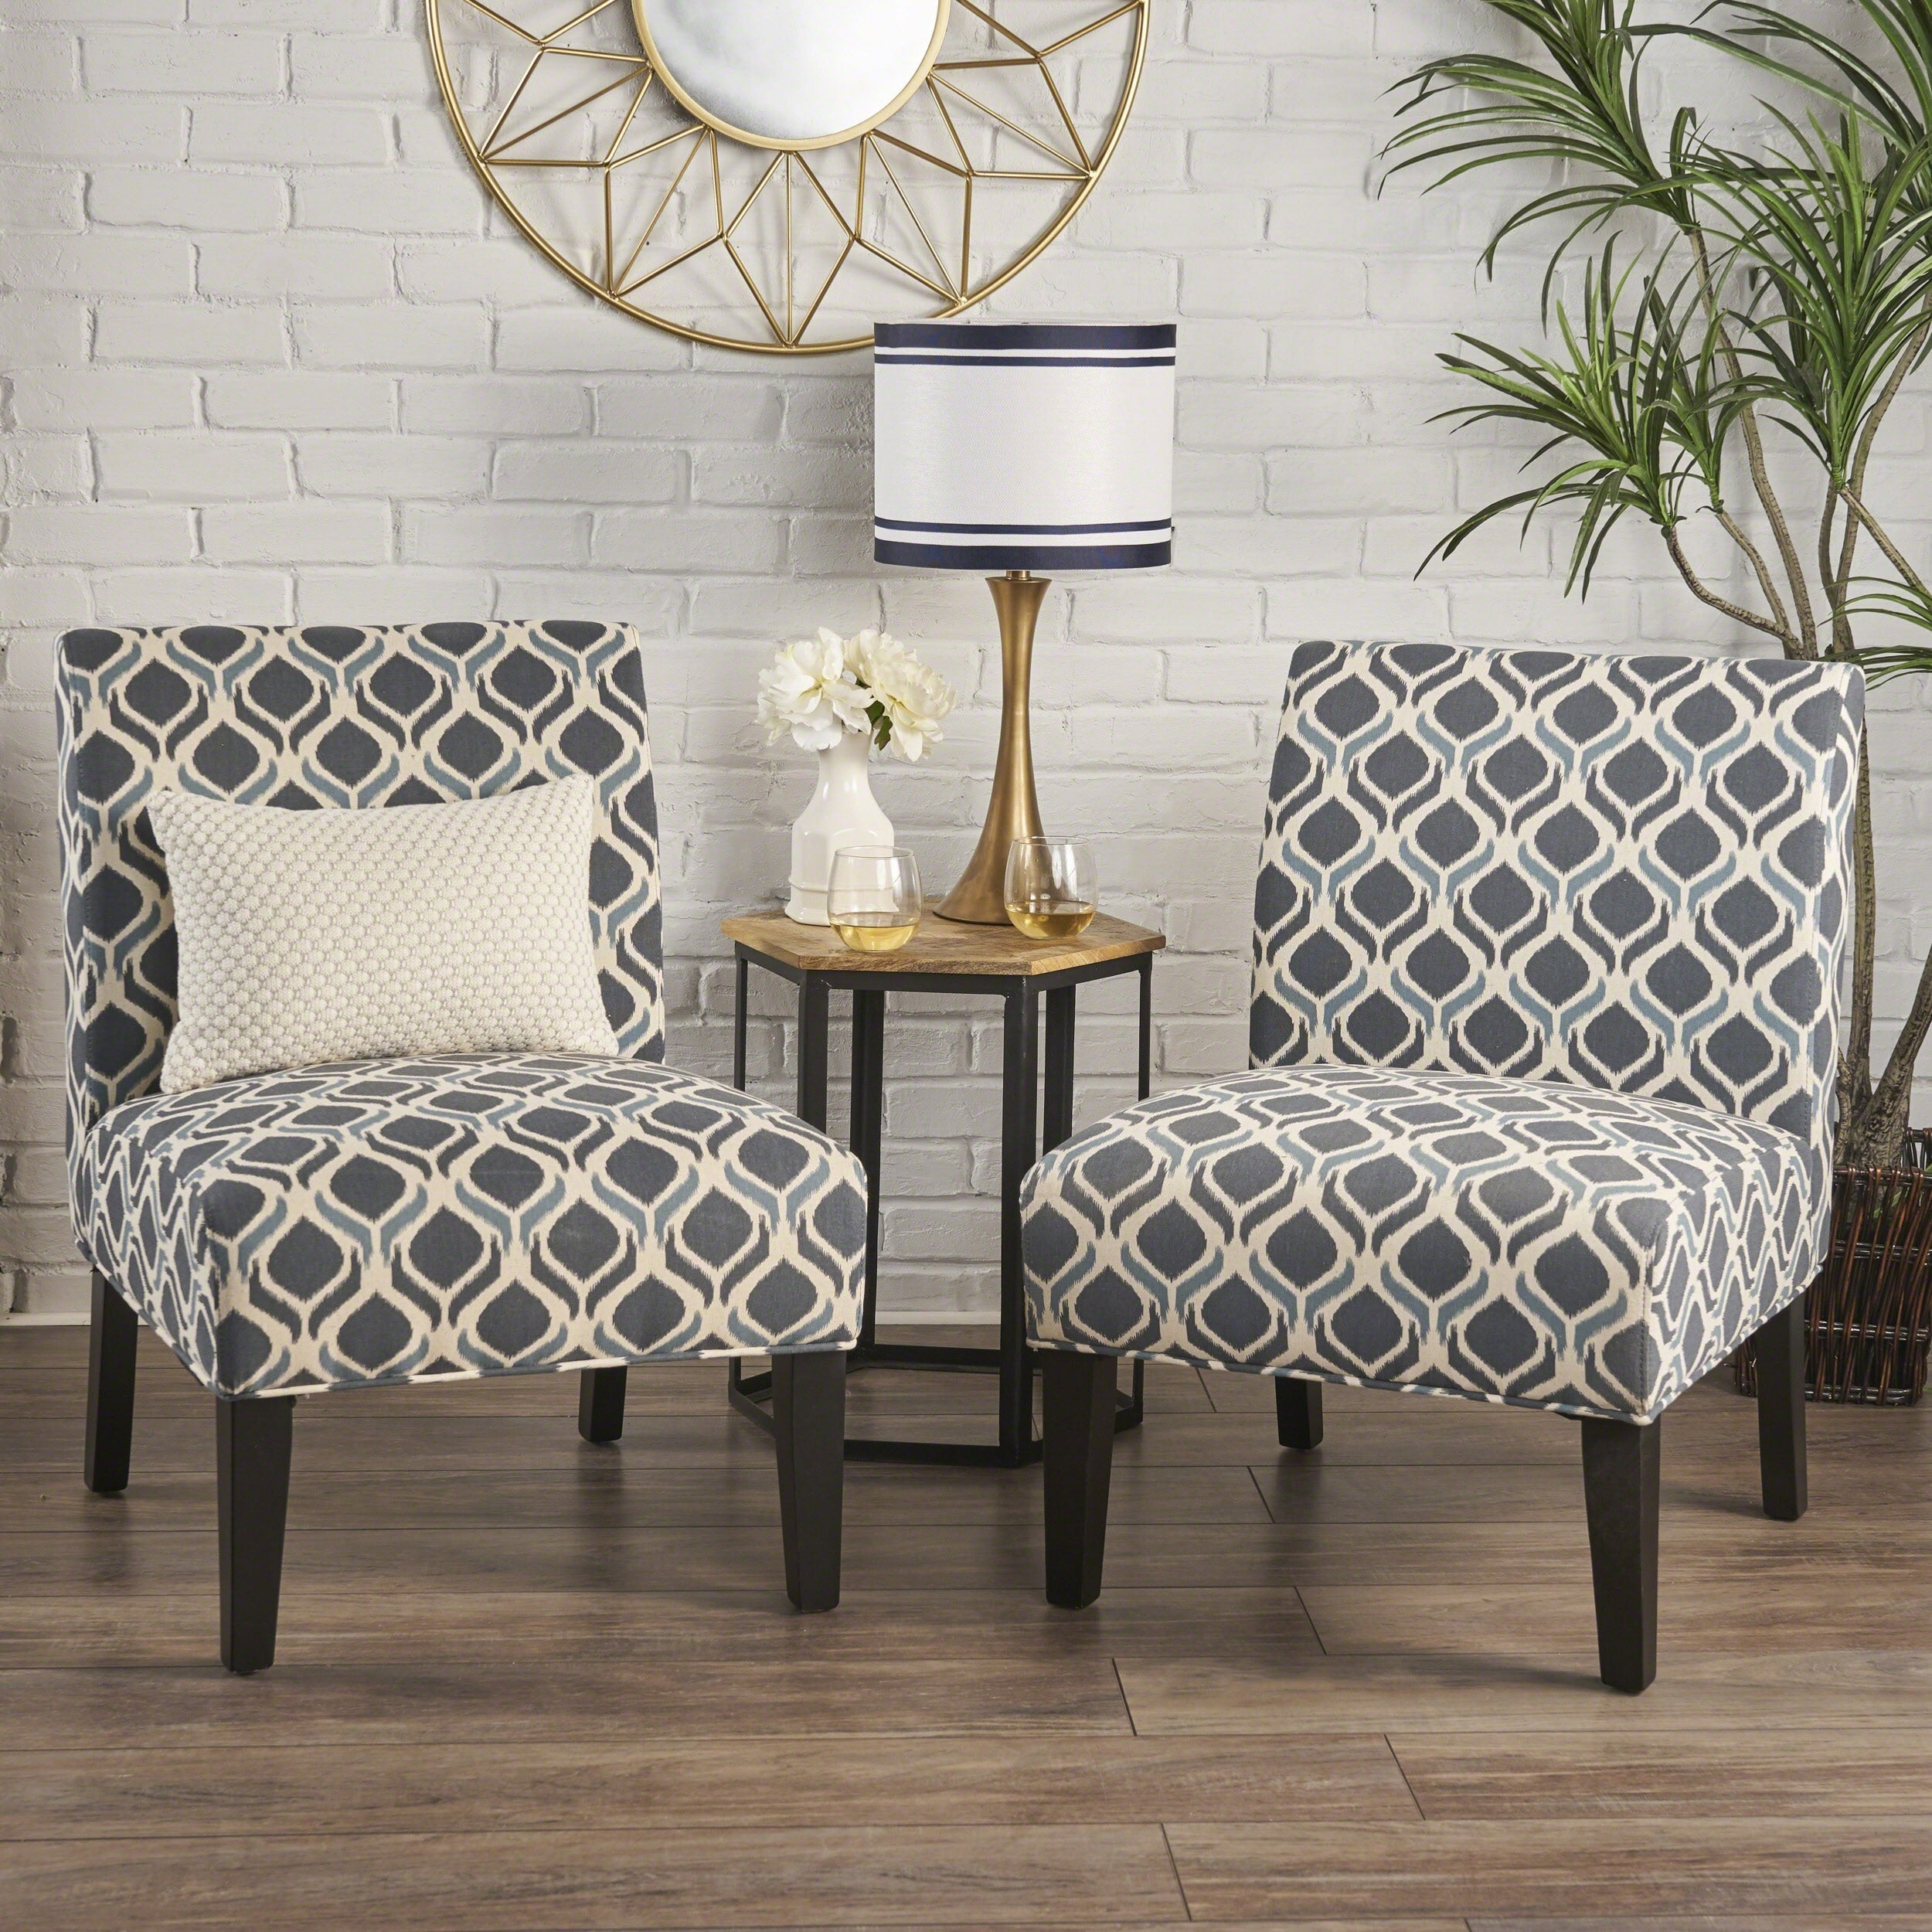 Printed Living Room Chairs
 Accent Chairs For Living Room Set 2 Soft Sturdy Armless